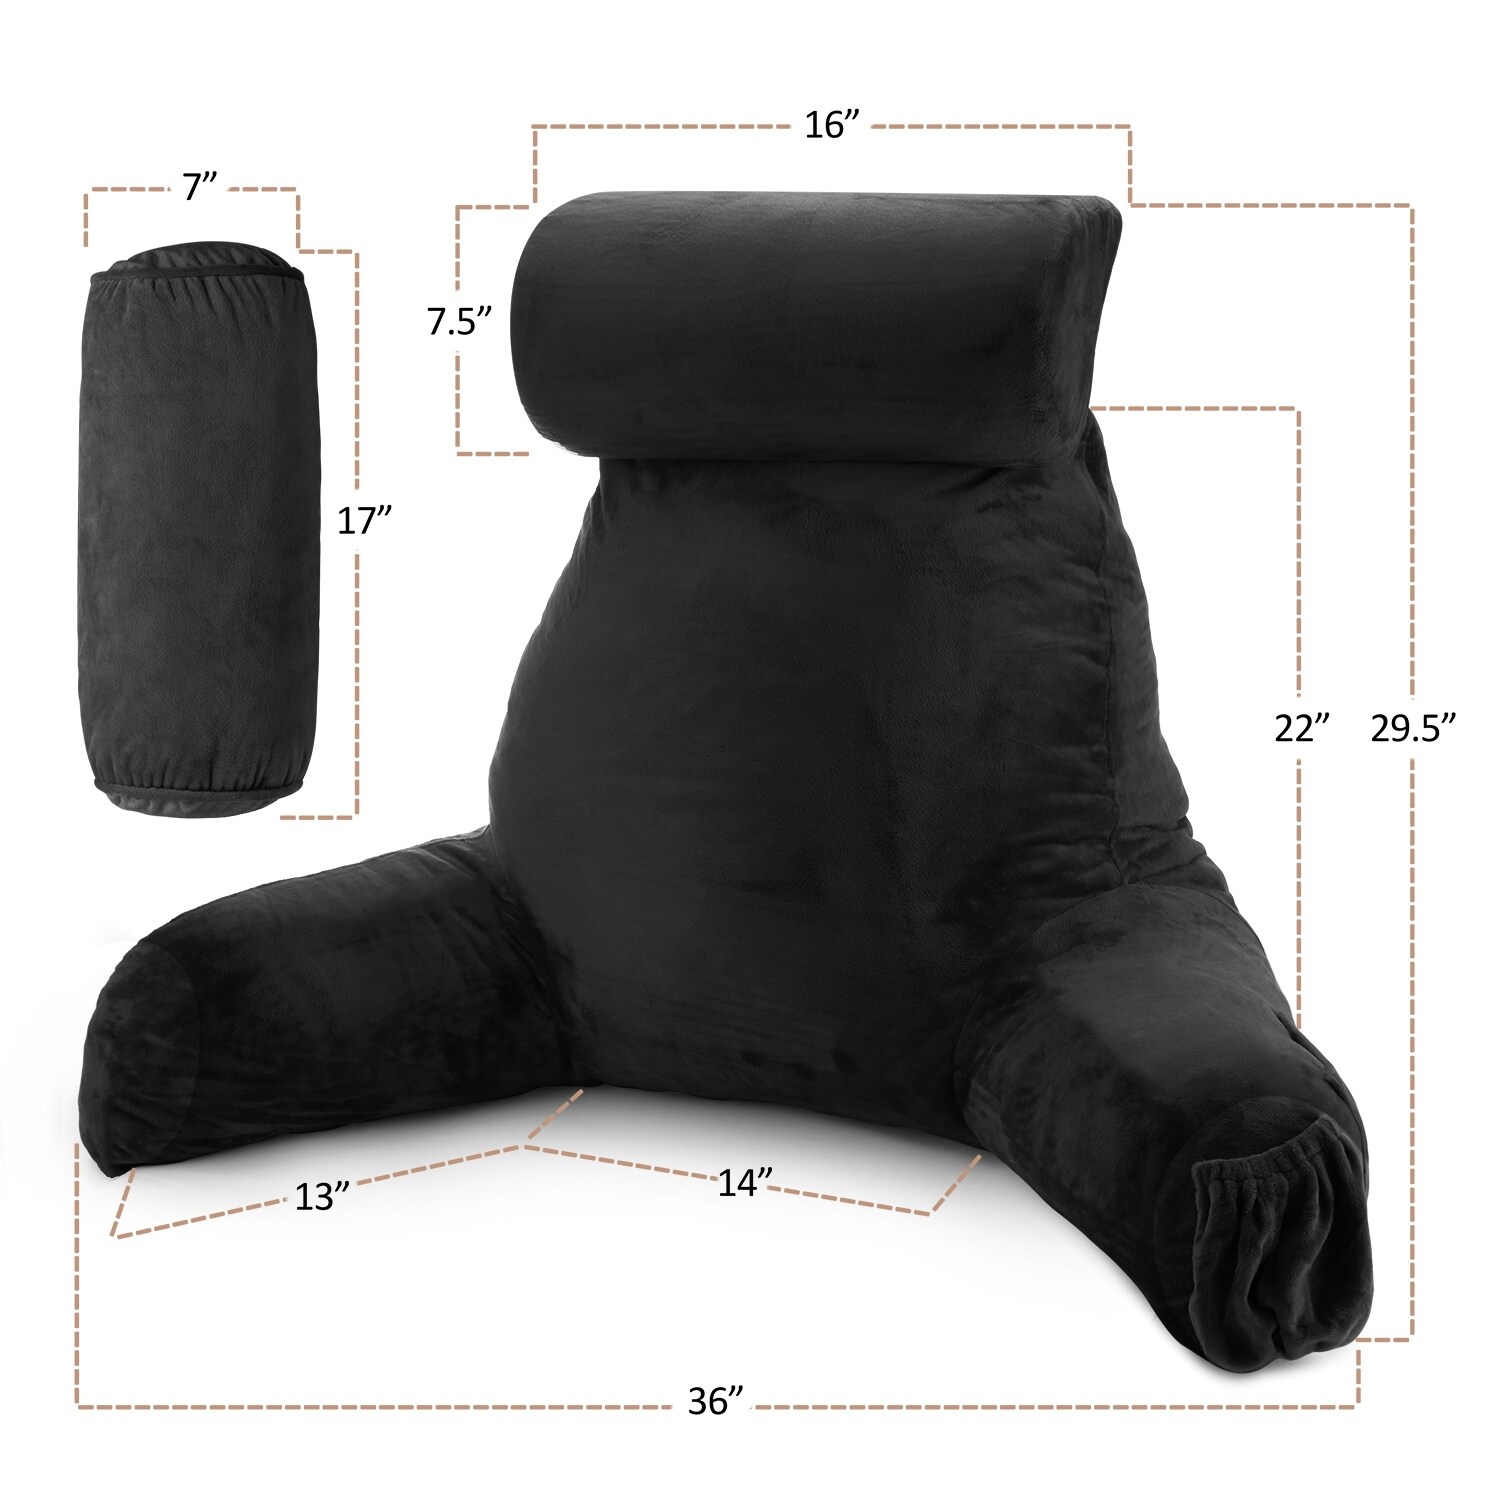 https://ak1.ostkcdn.com/images/products/is/images/direct/ef8b94b1298435615dac11a6fb9acc62265fbbcb/Nestl-Backrest-Reading-Pillow-with-Arms---Shredded-Memory-Foam-Back-Support-Bed-Rest-Pillow.jpg